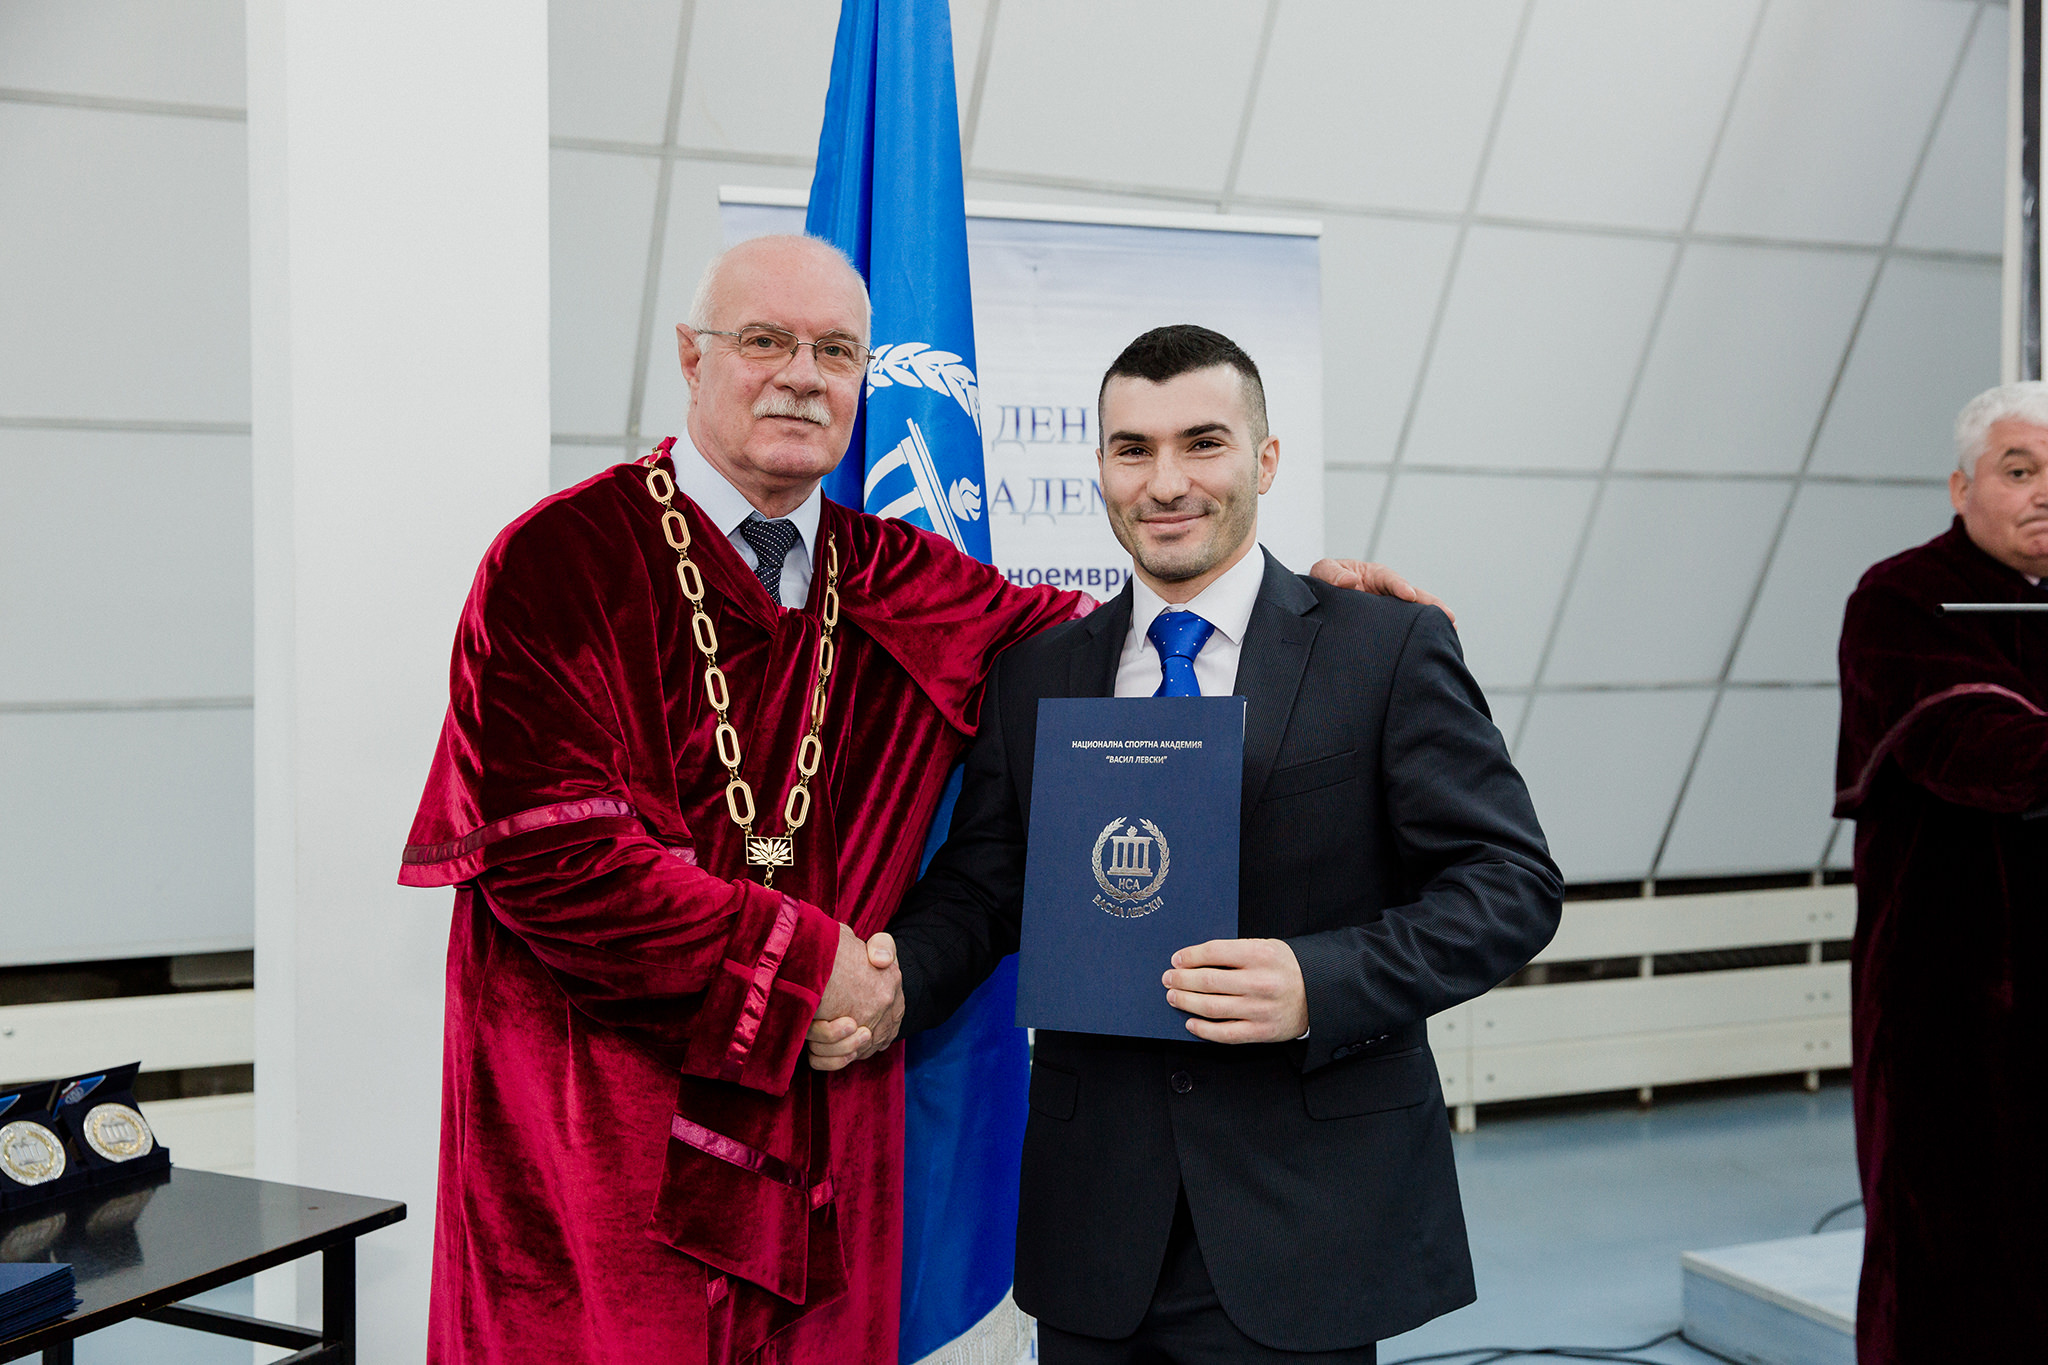 coach Stefan was awarded the degree of Doctor of Philosophy in 2018